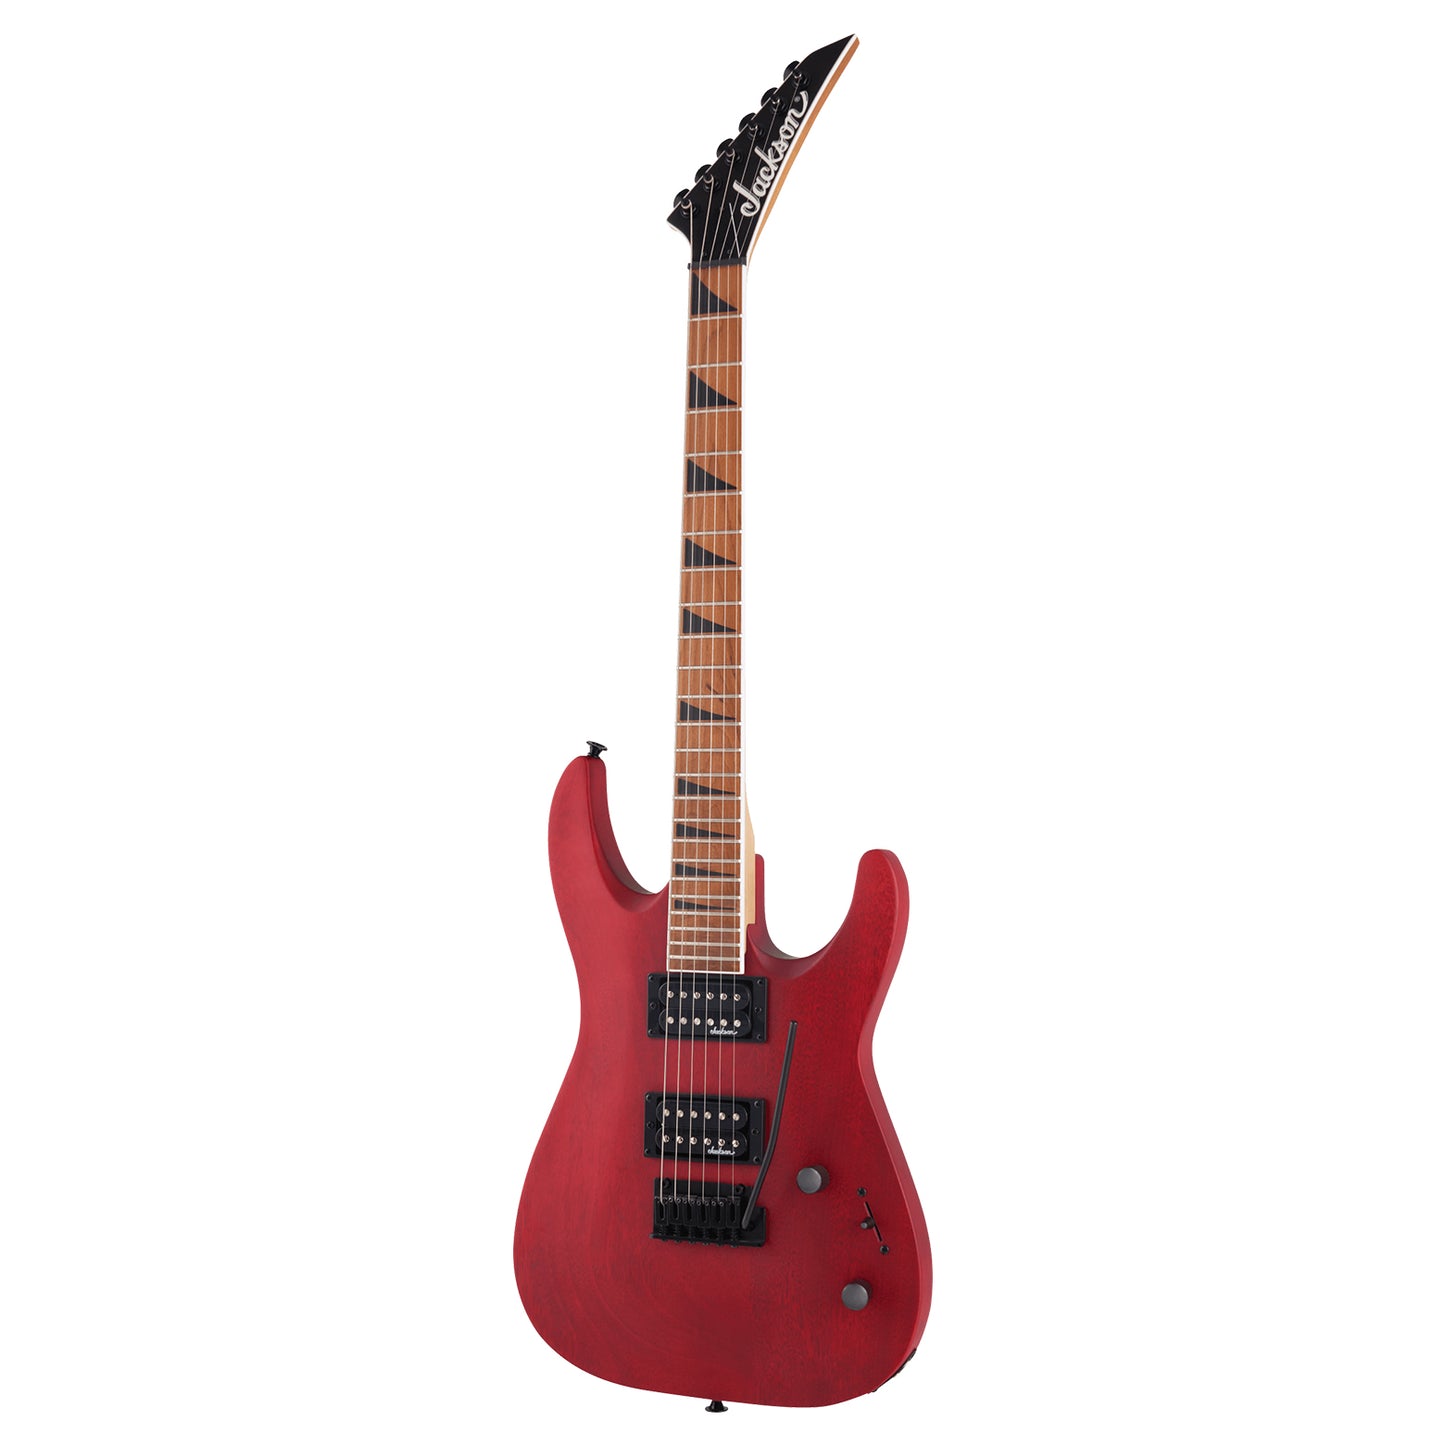 Jackson JS24 Dinky Arch Top DKAM Electric Guitar HH with Solid Mahogany Body, 2-point Tremolo Bridge, Classic Tone (Black, Red)